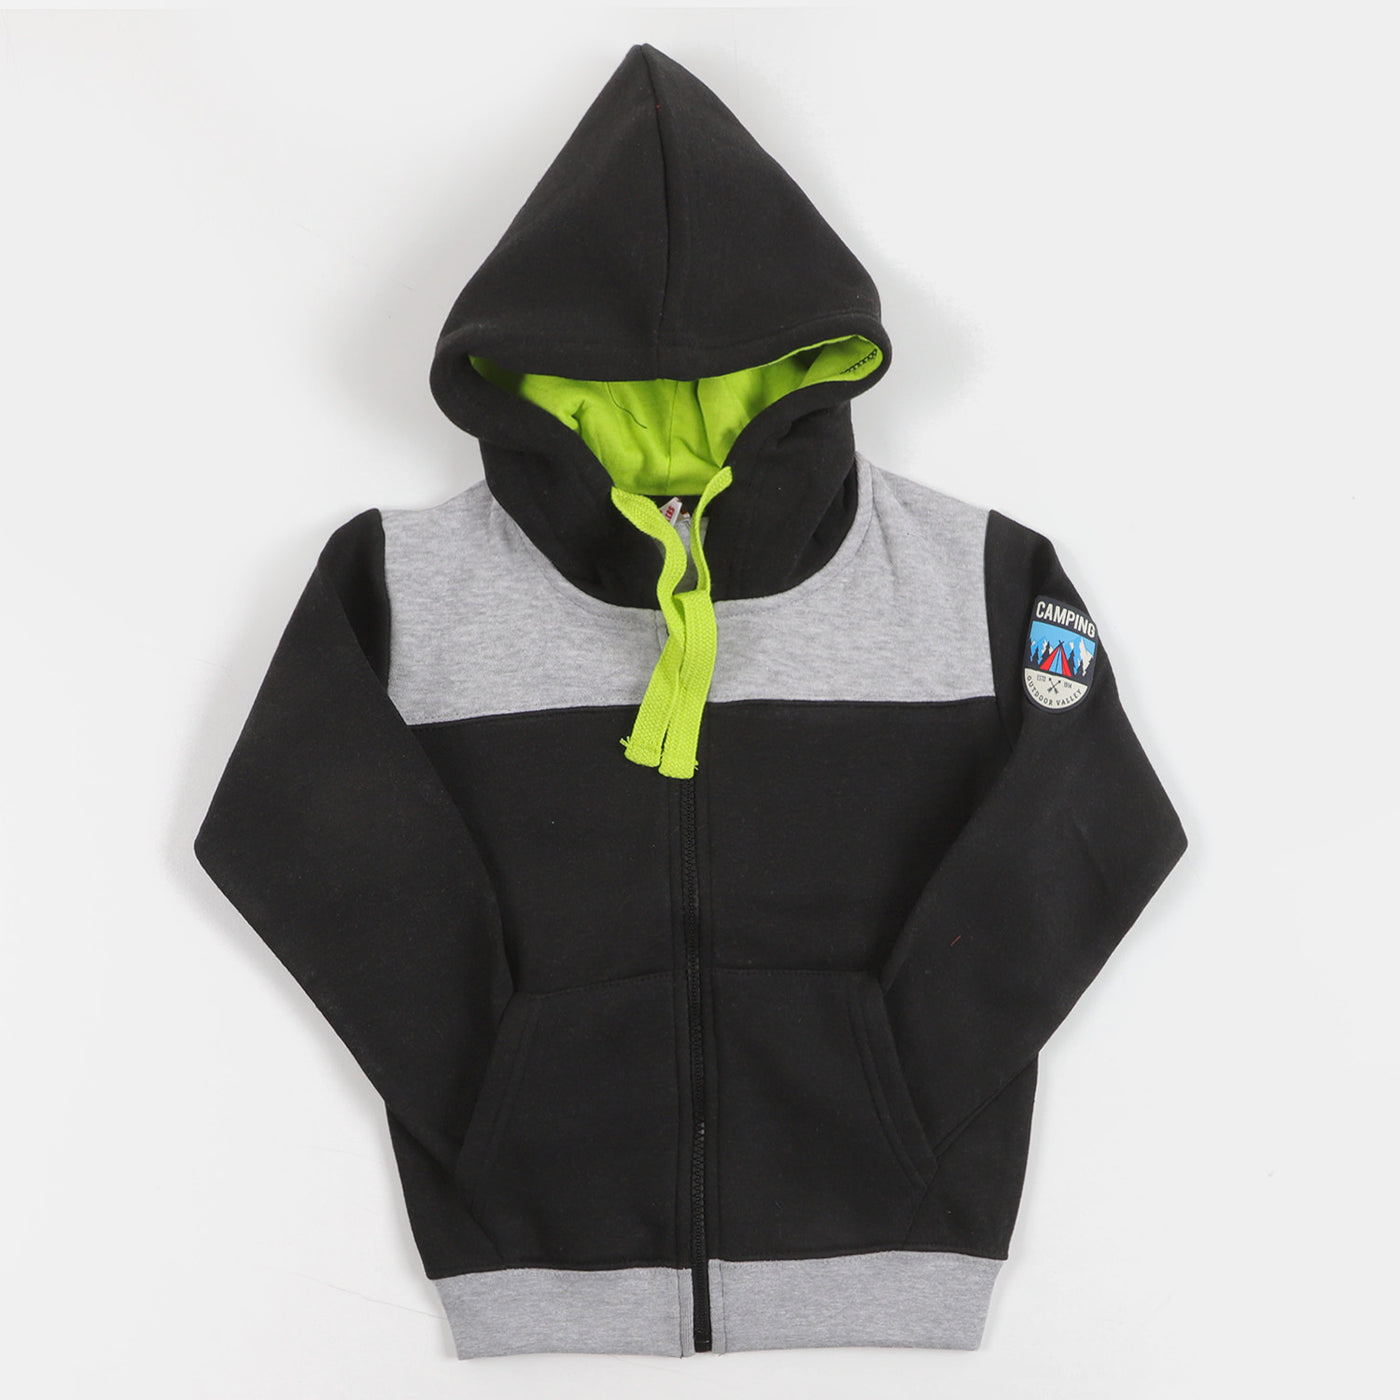 Girls Jacket Camping Out Door Valley - Black/Gray